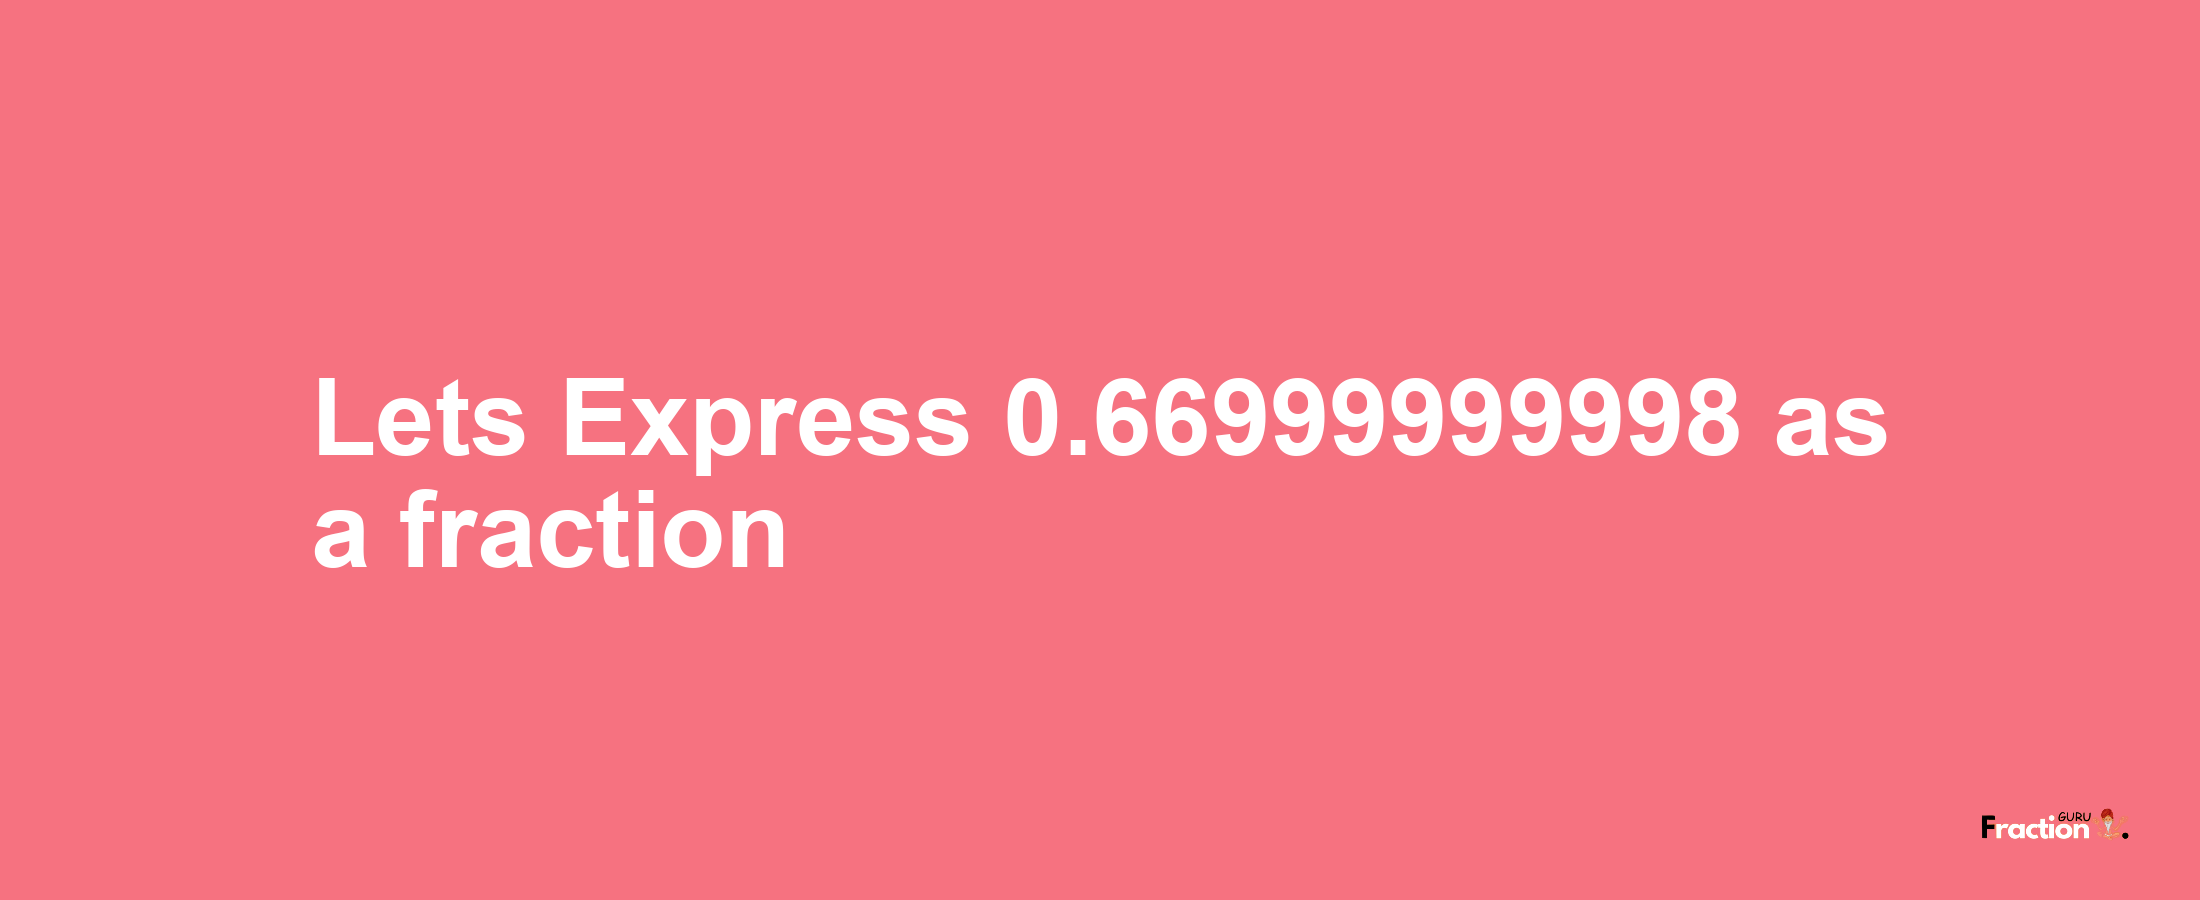 Lets Express 0.66999999998 as afraction